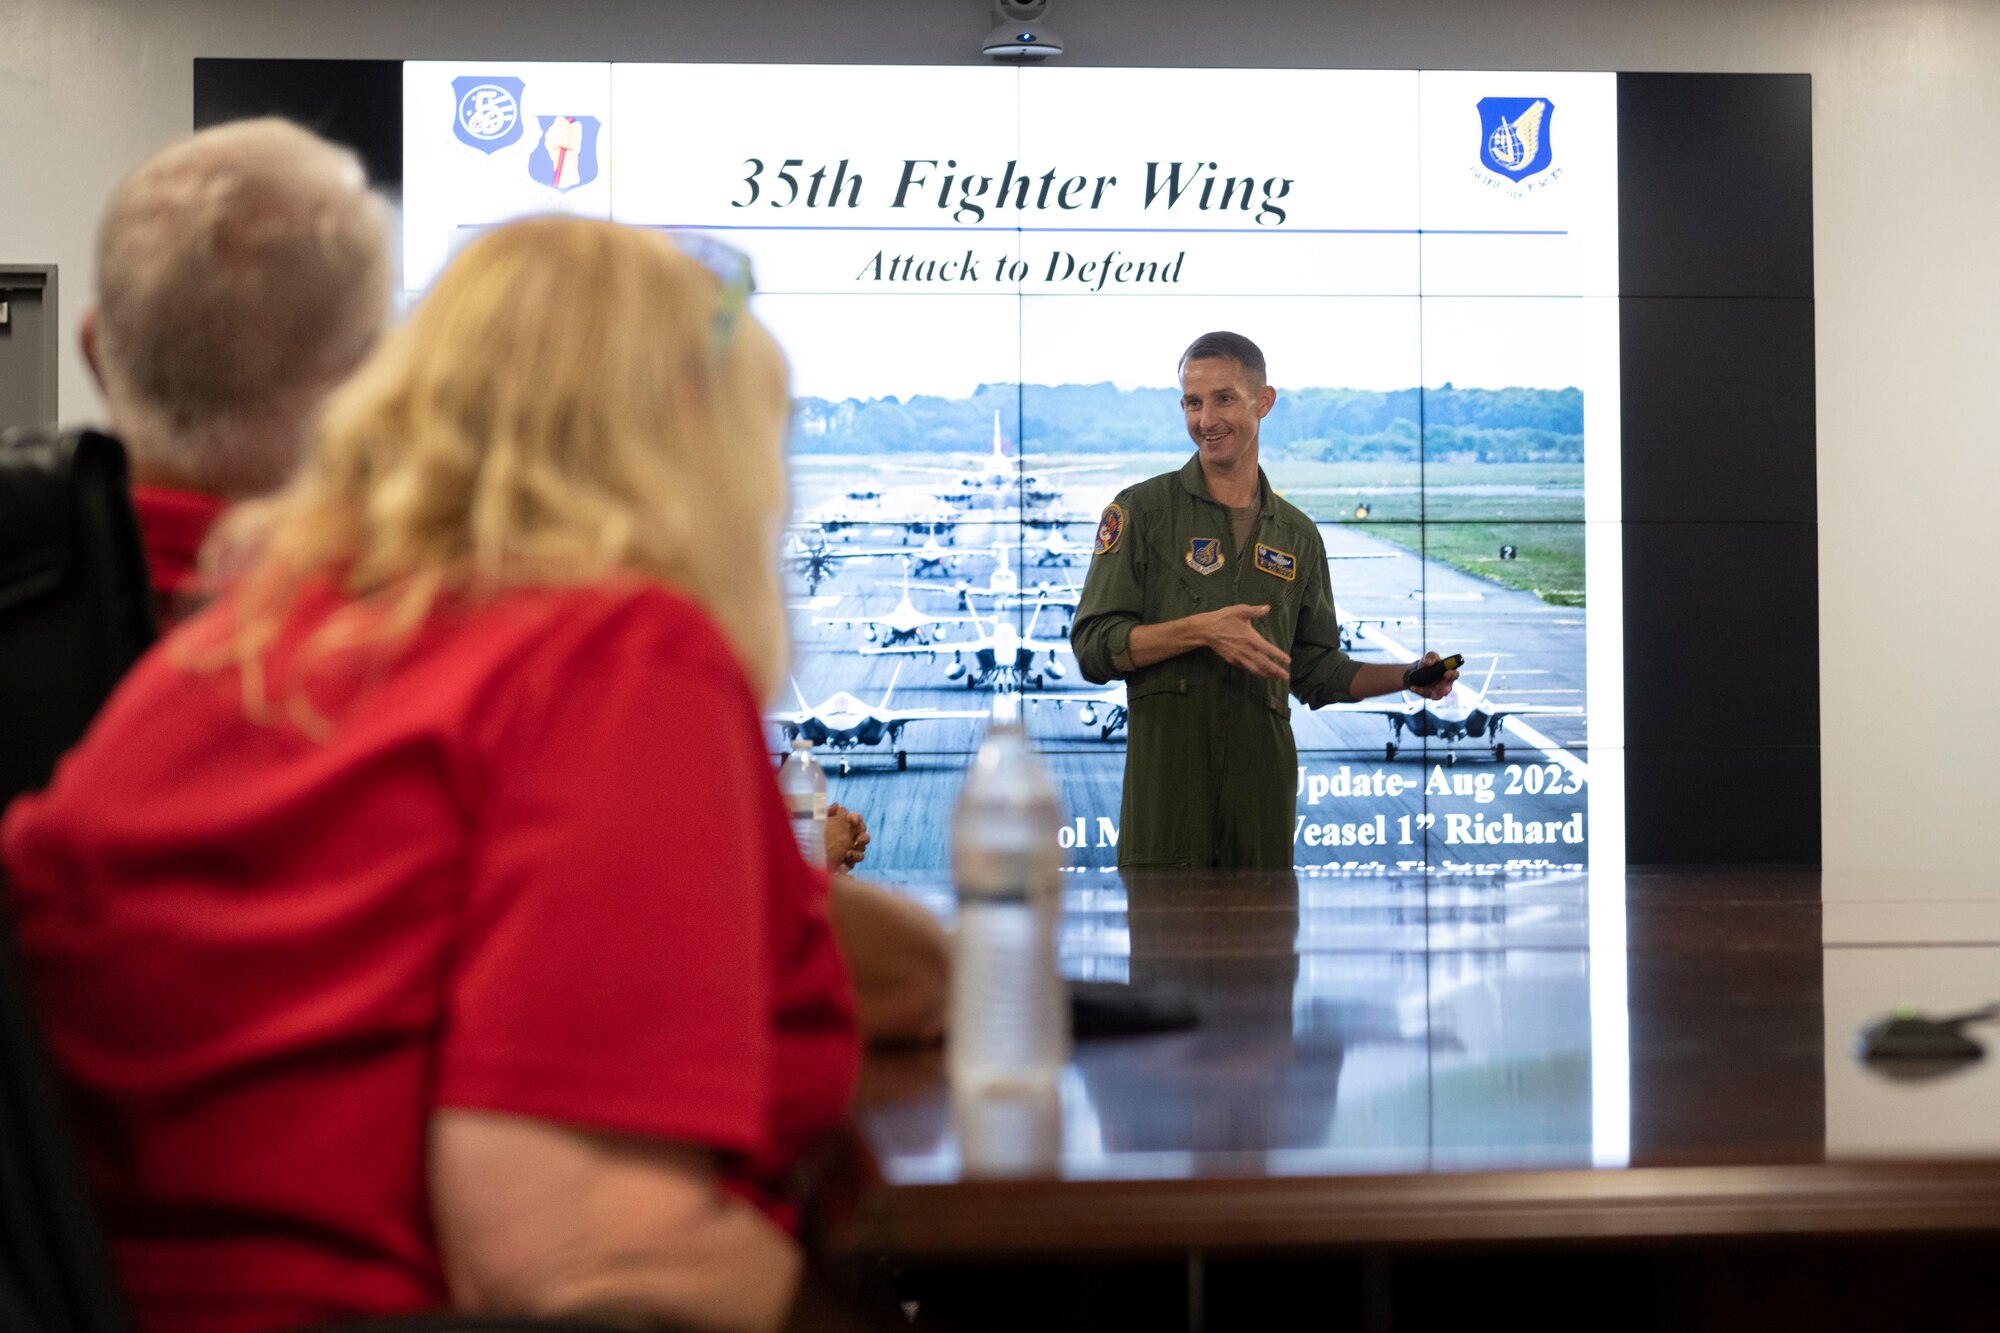 U.S. Air Force Col. Michael Richard, 35th Fighter Wing commander, gives a presentation to a group of delegates from Wetatchee Valley, Washington.